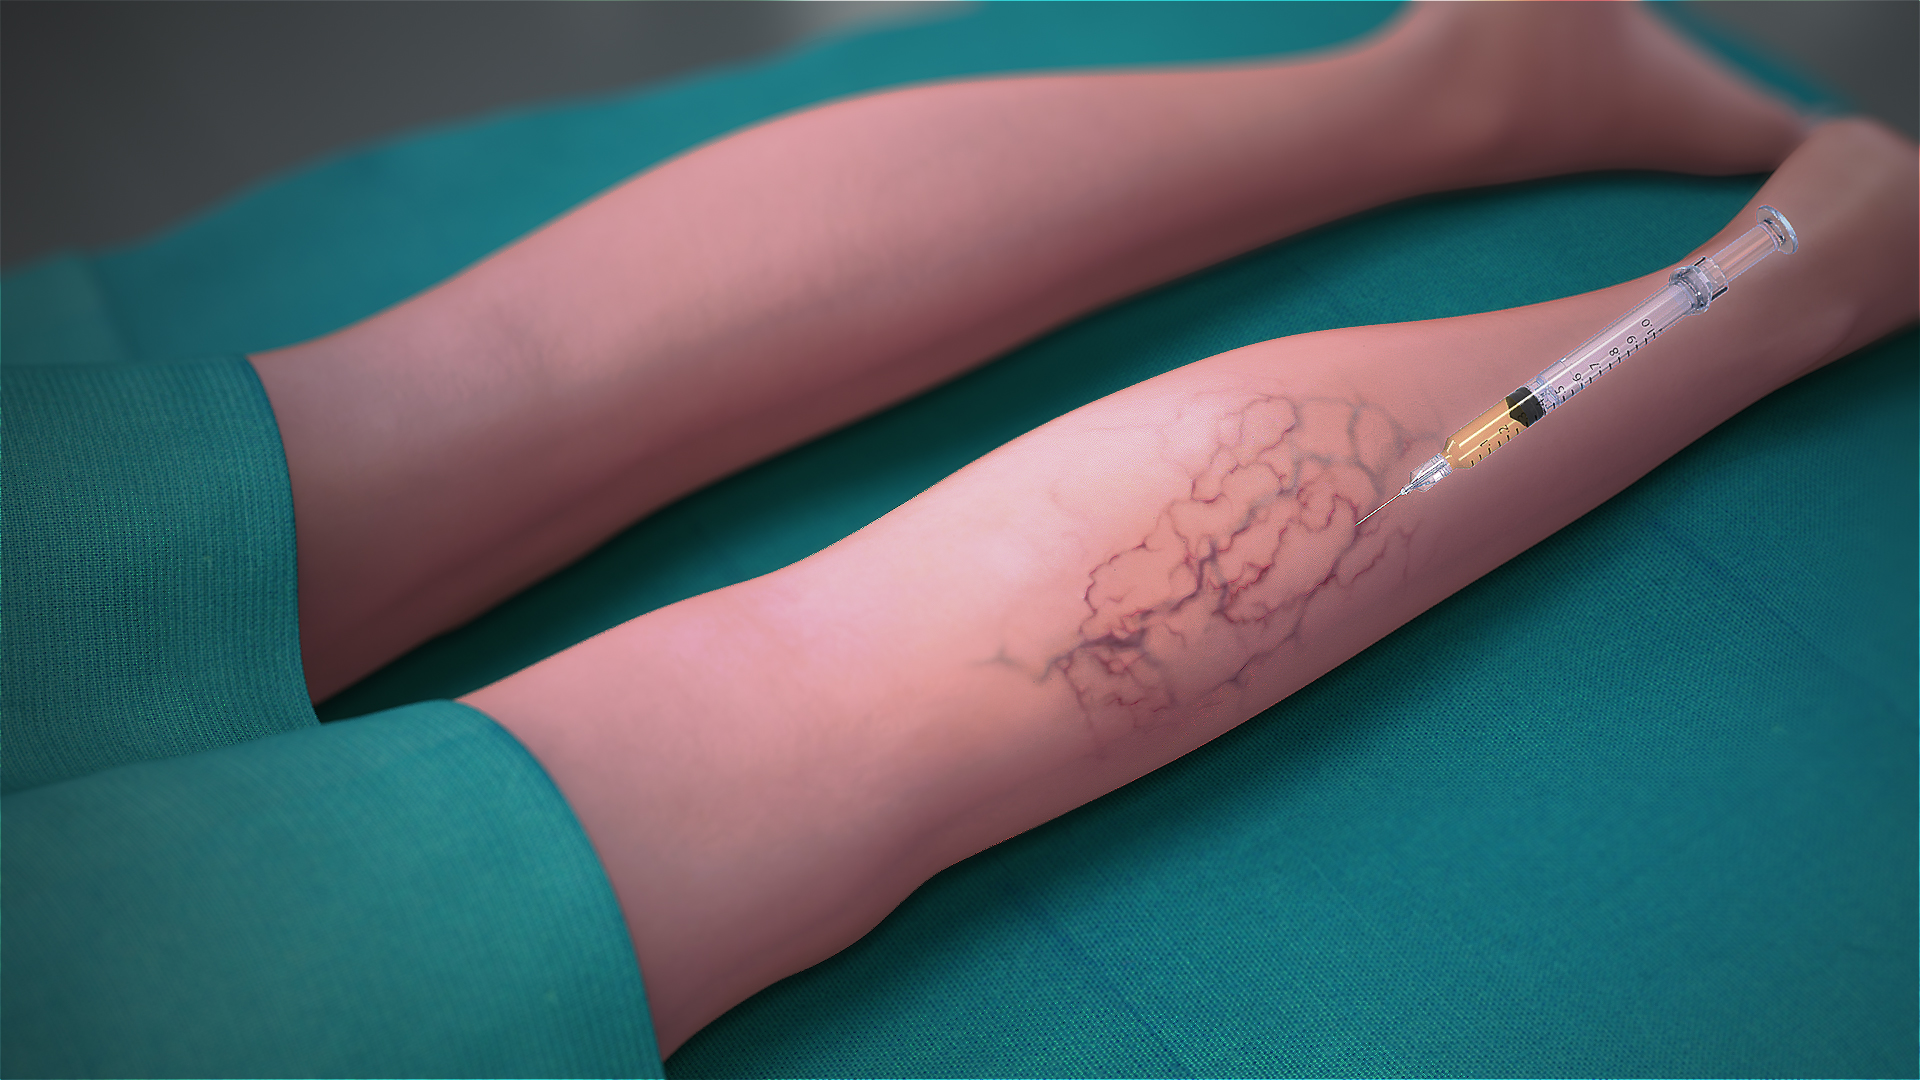 Treating Varicose Veins Focus On Sclerotherapy Scientific Animations